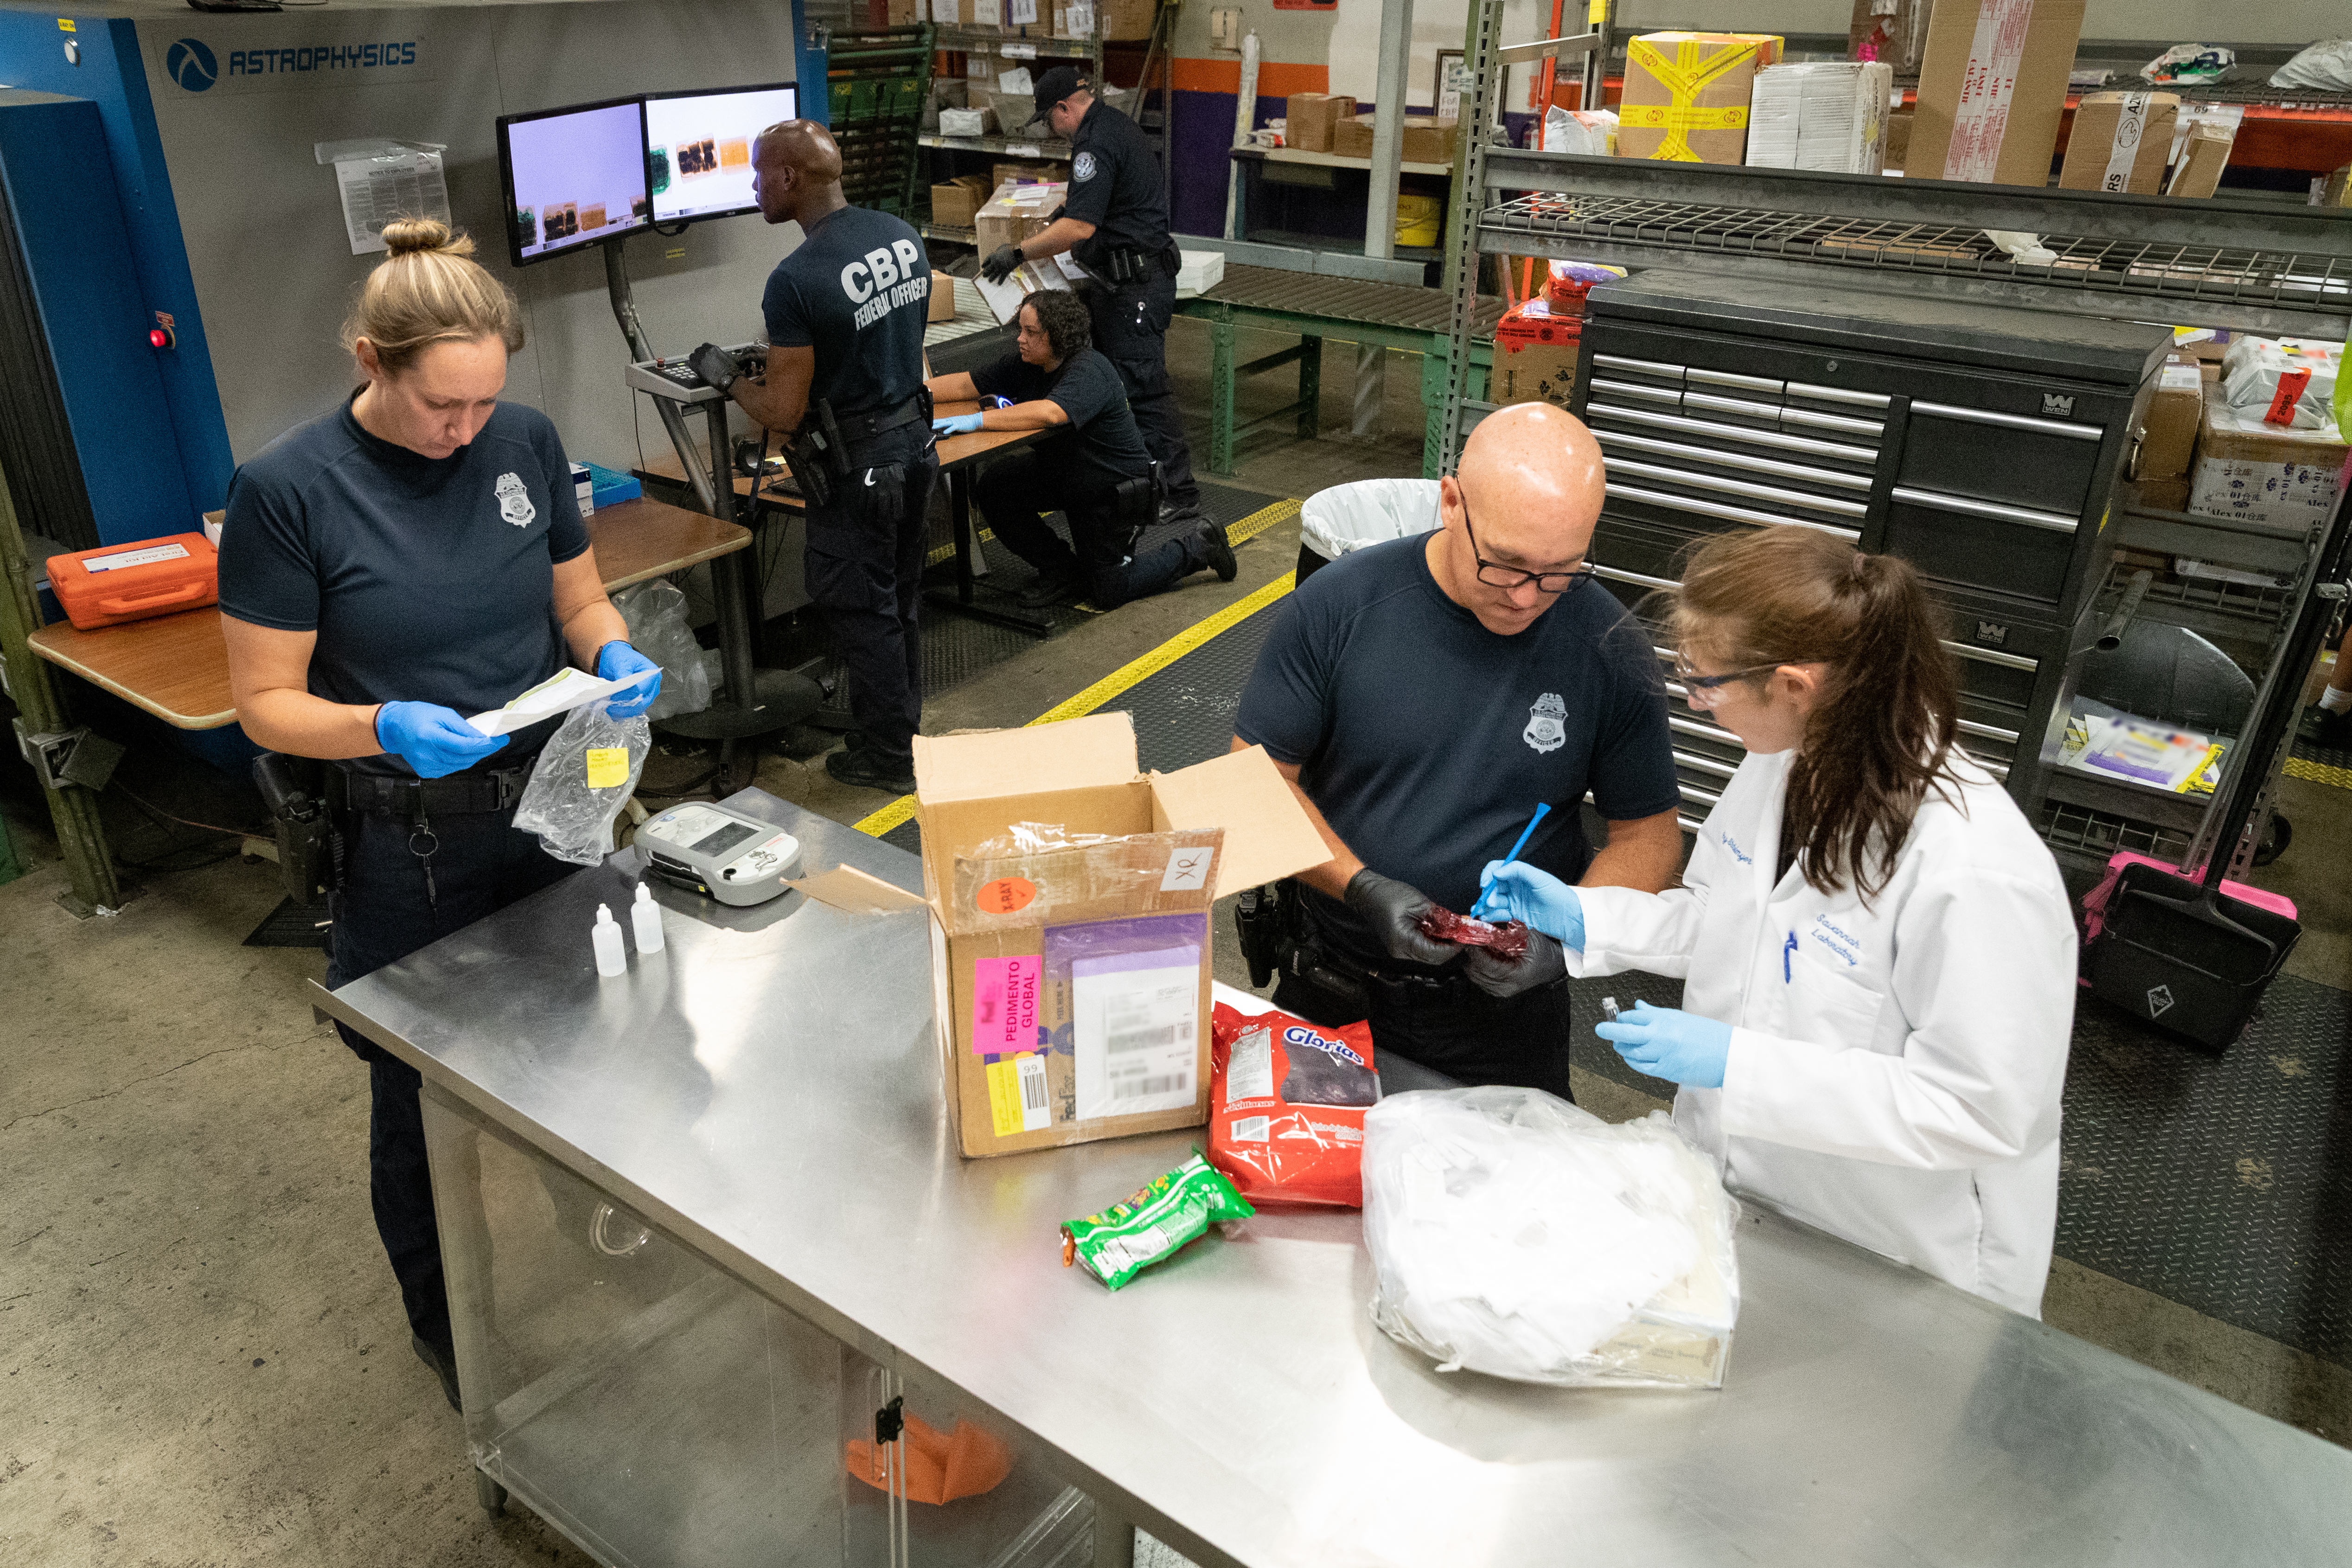 CBP employees work in a triage area